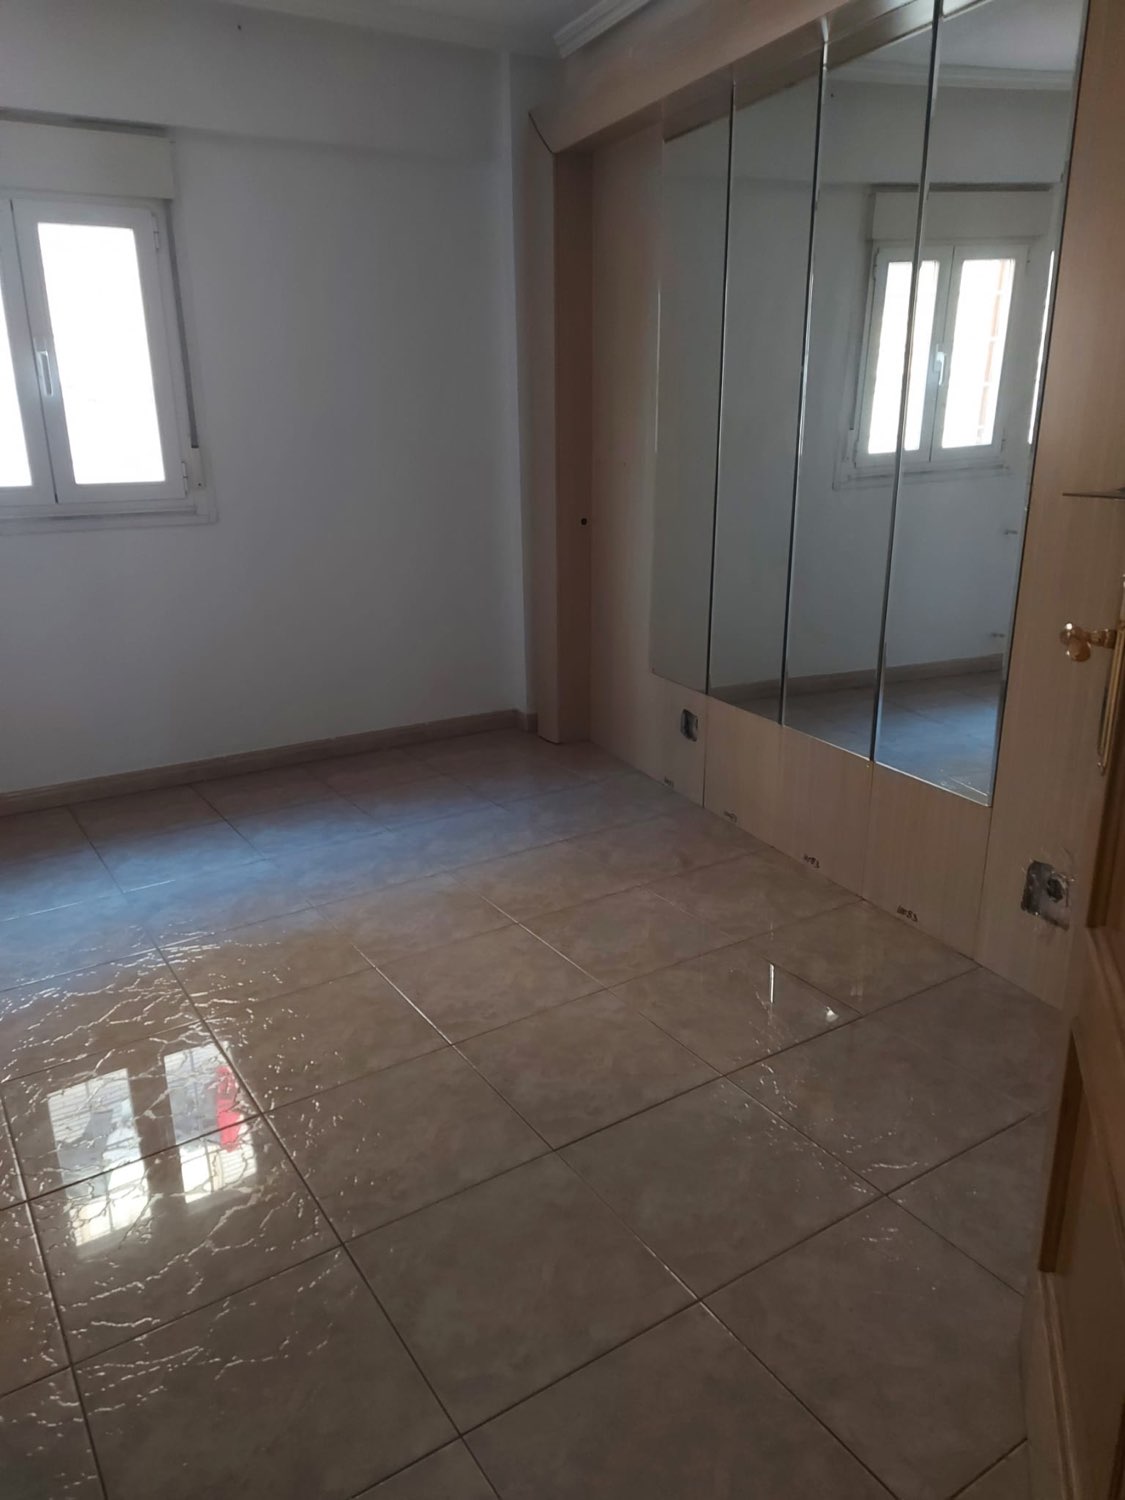 Flat for sale in Madrid